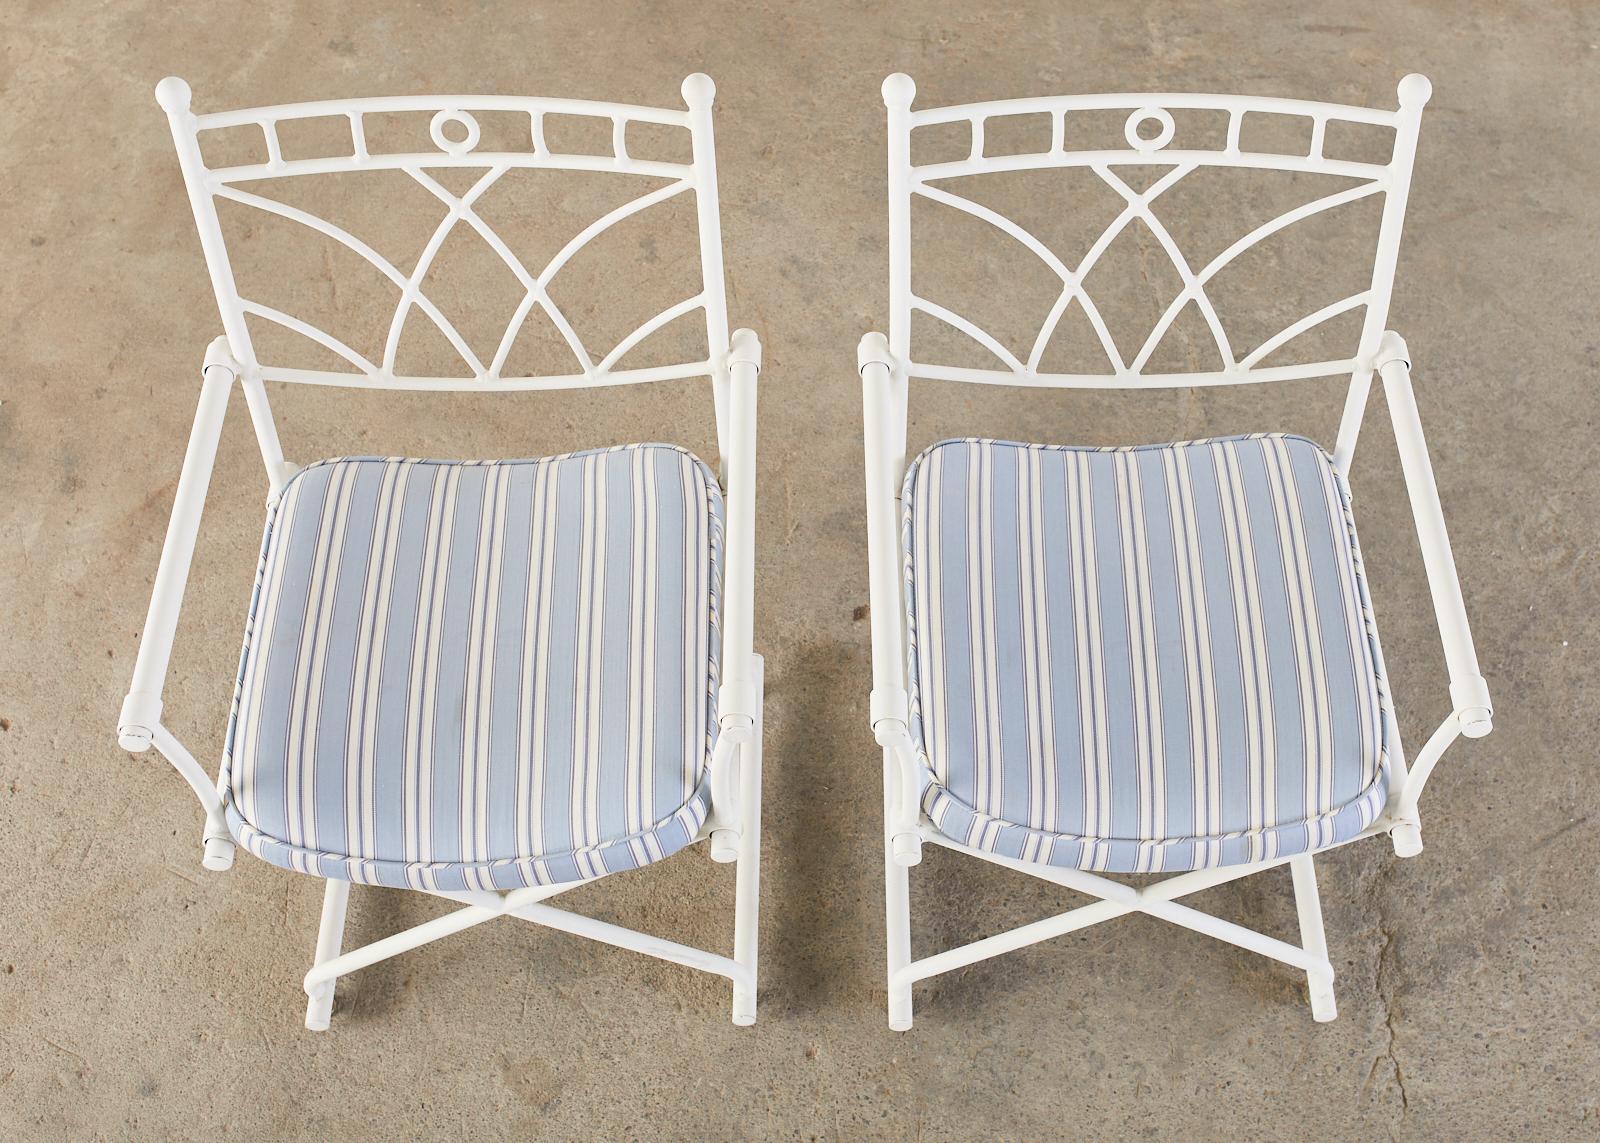 Fabric Set of Four Wrought Iron Director Style Garden Armchairs